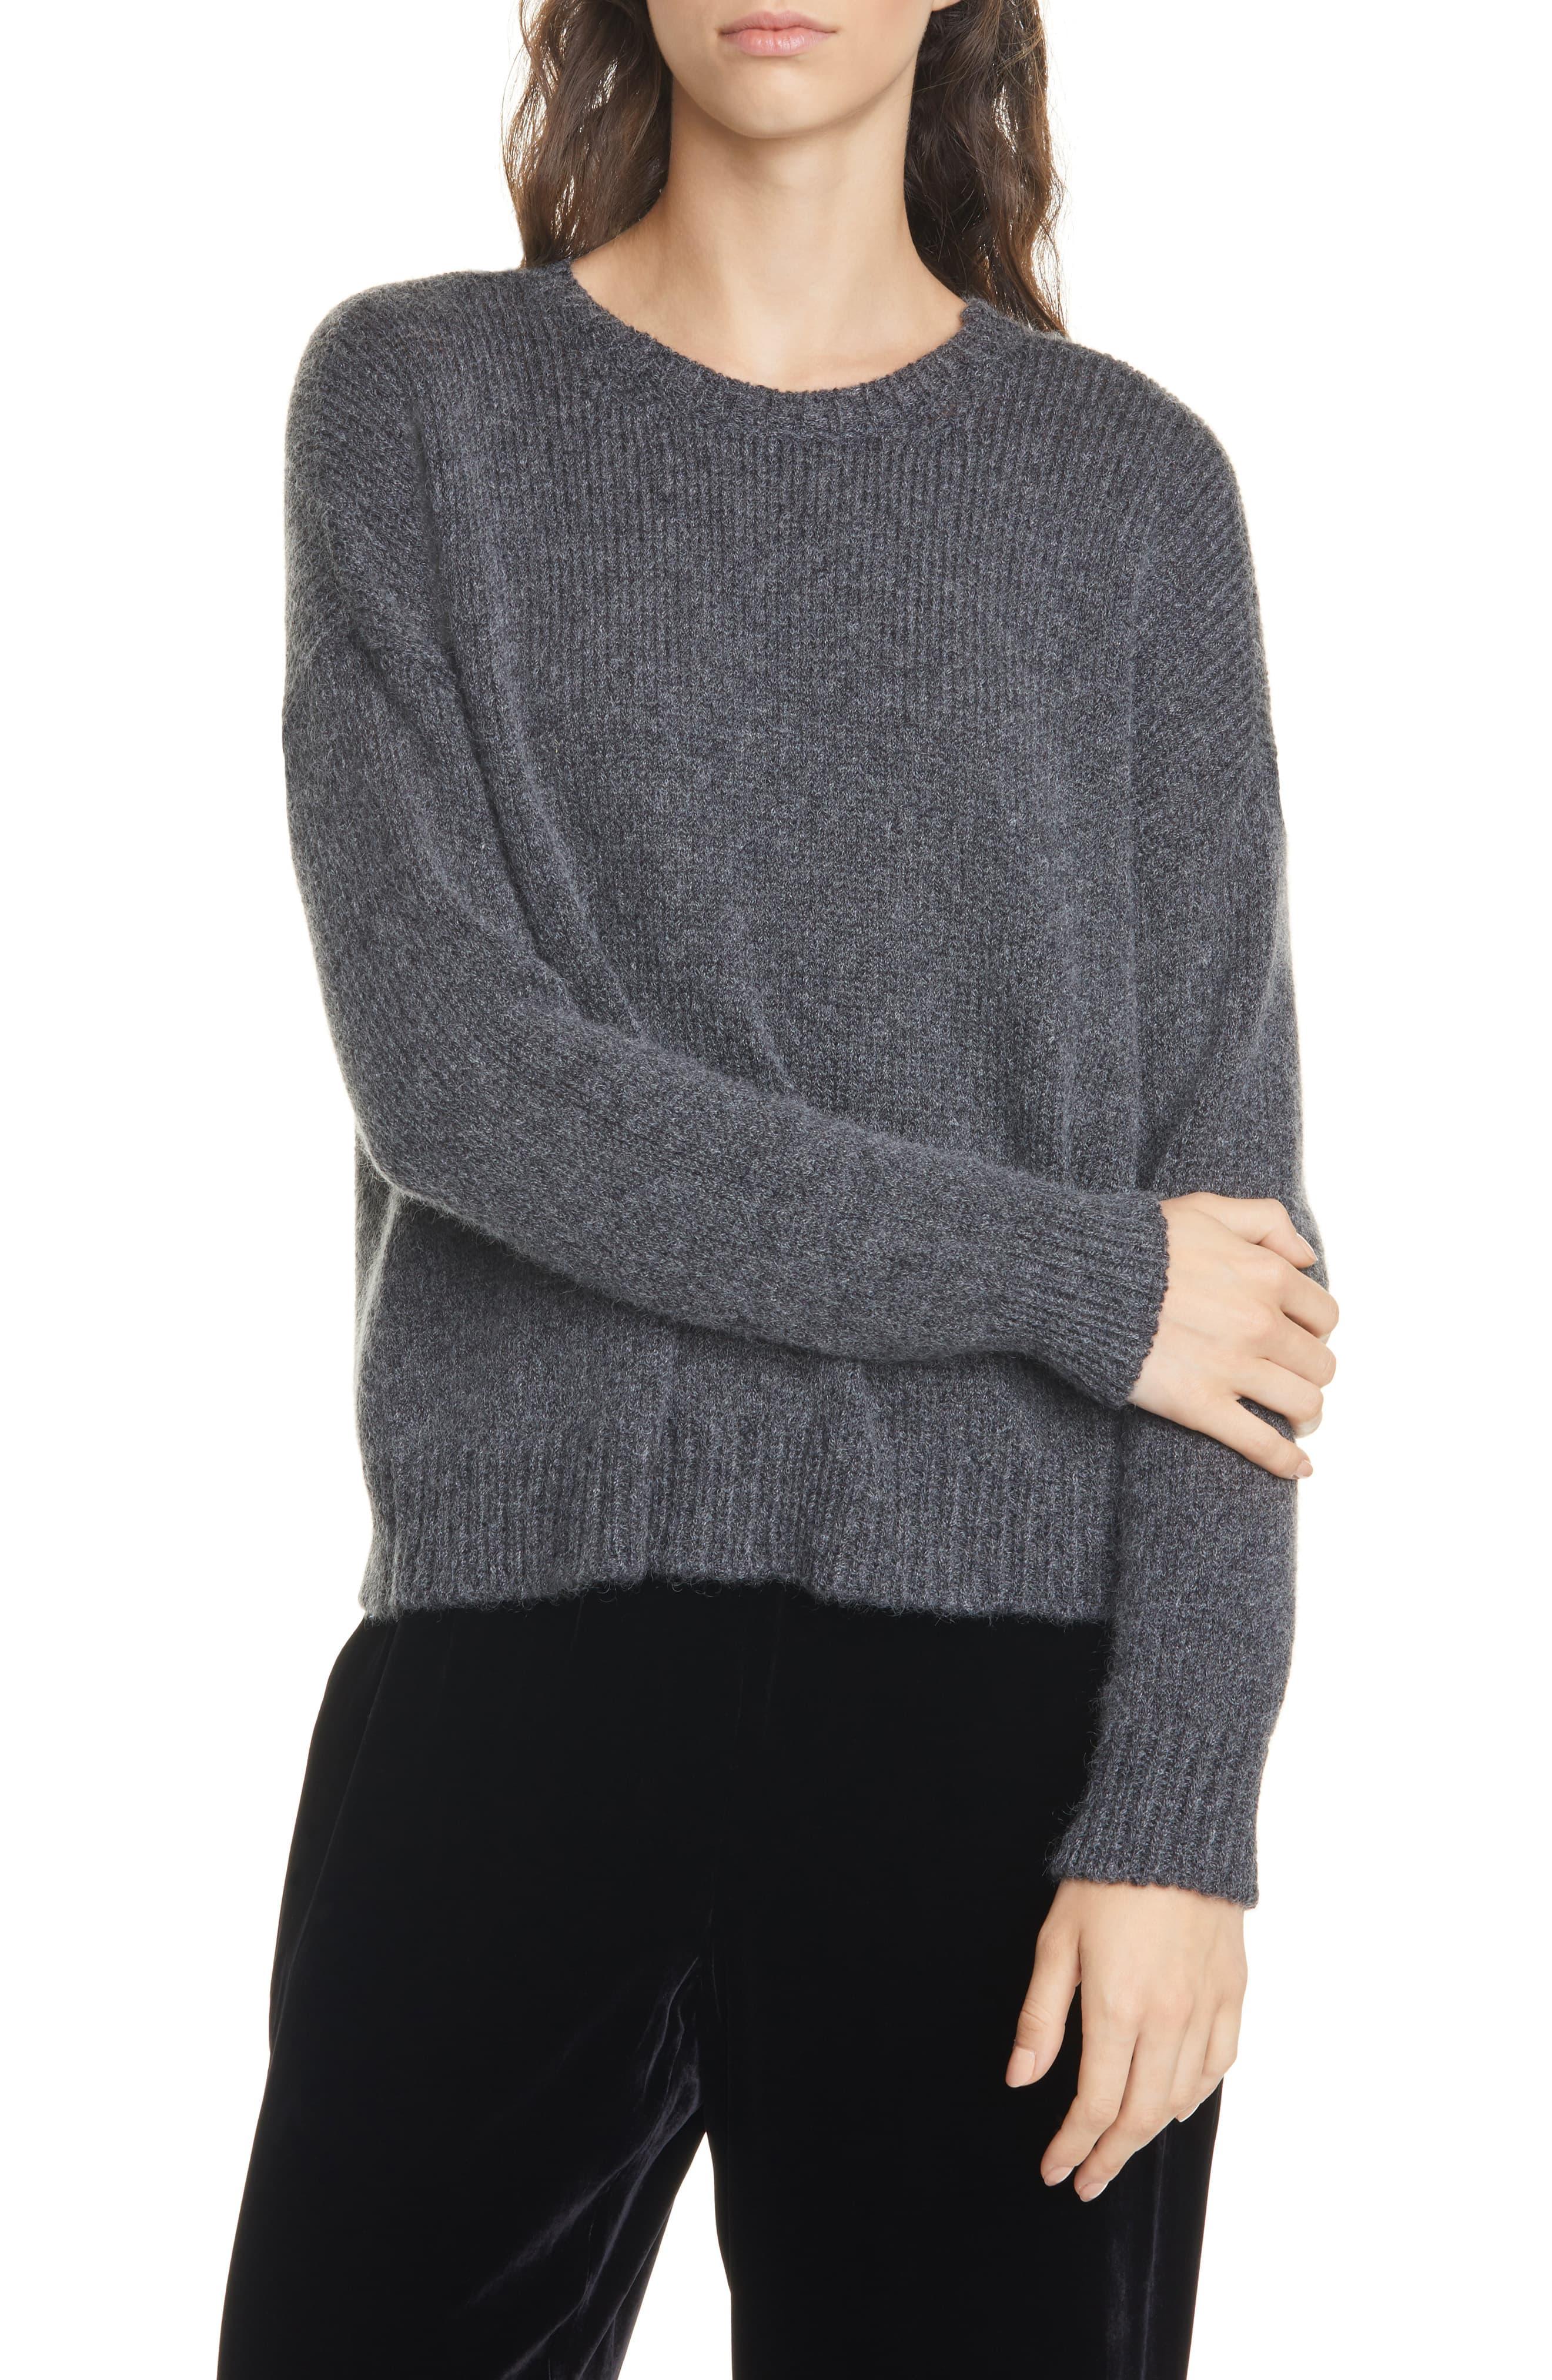 Eileen Fisher Wool & Mohair Blend Crewneck Sweater in Charcoal (Gray